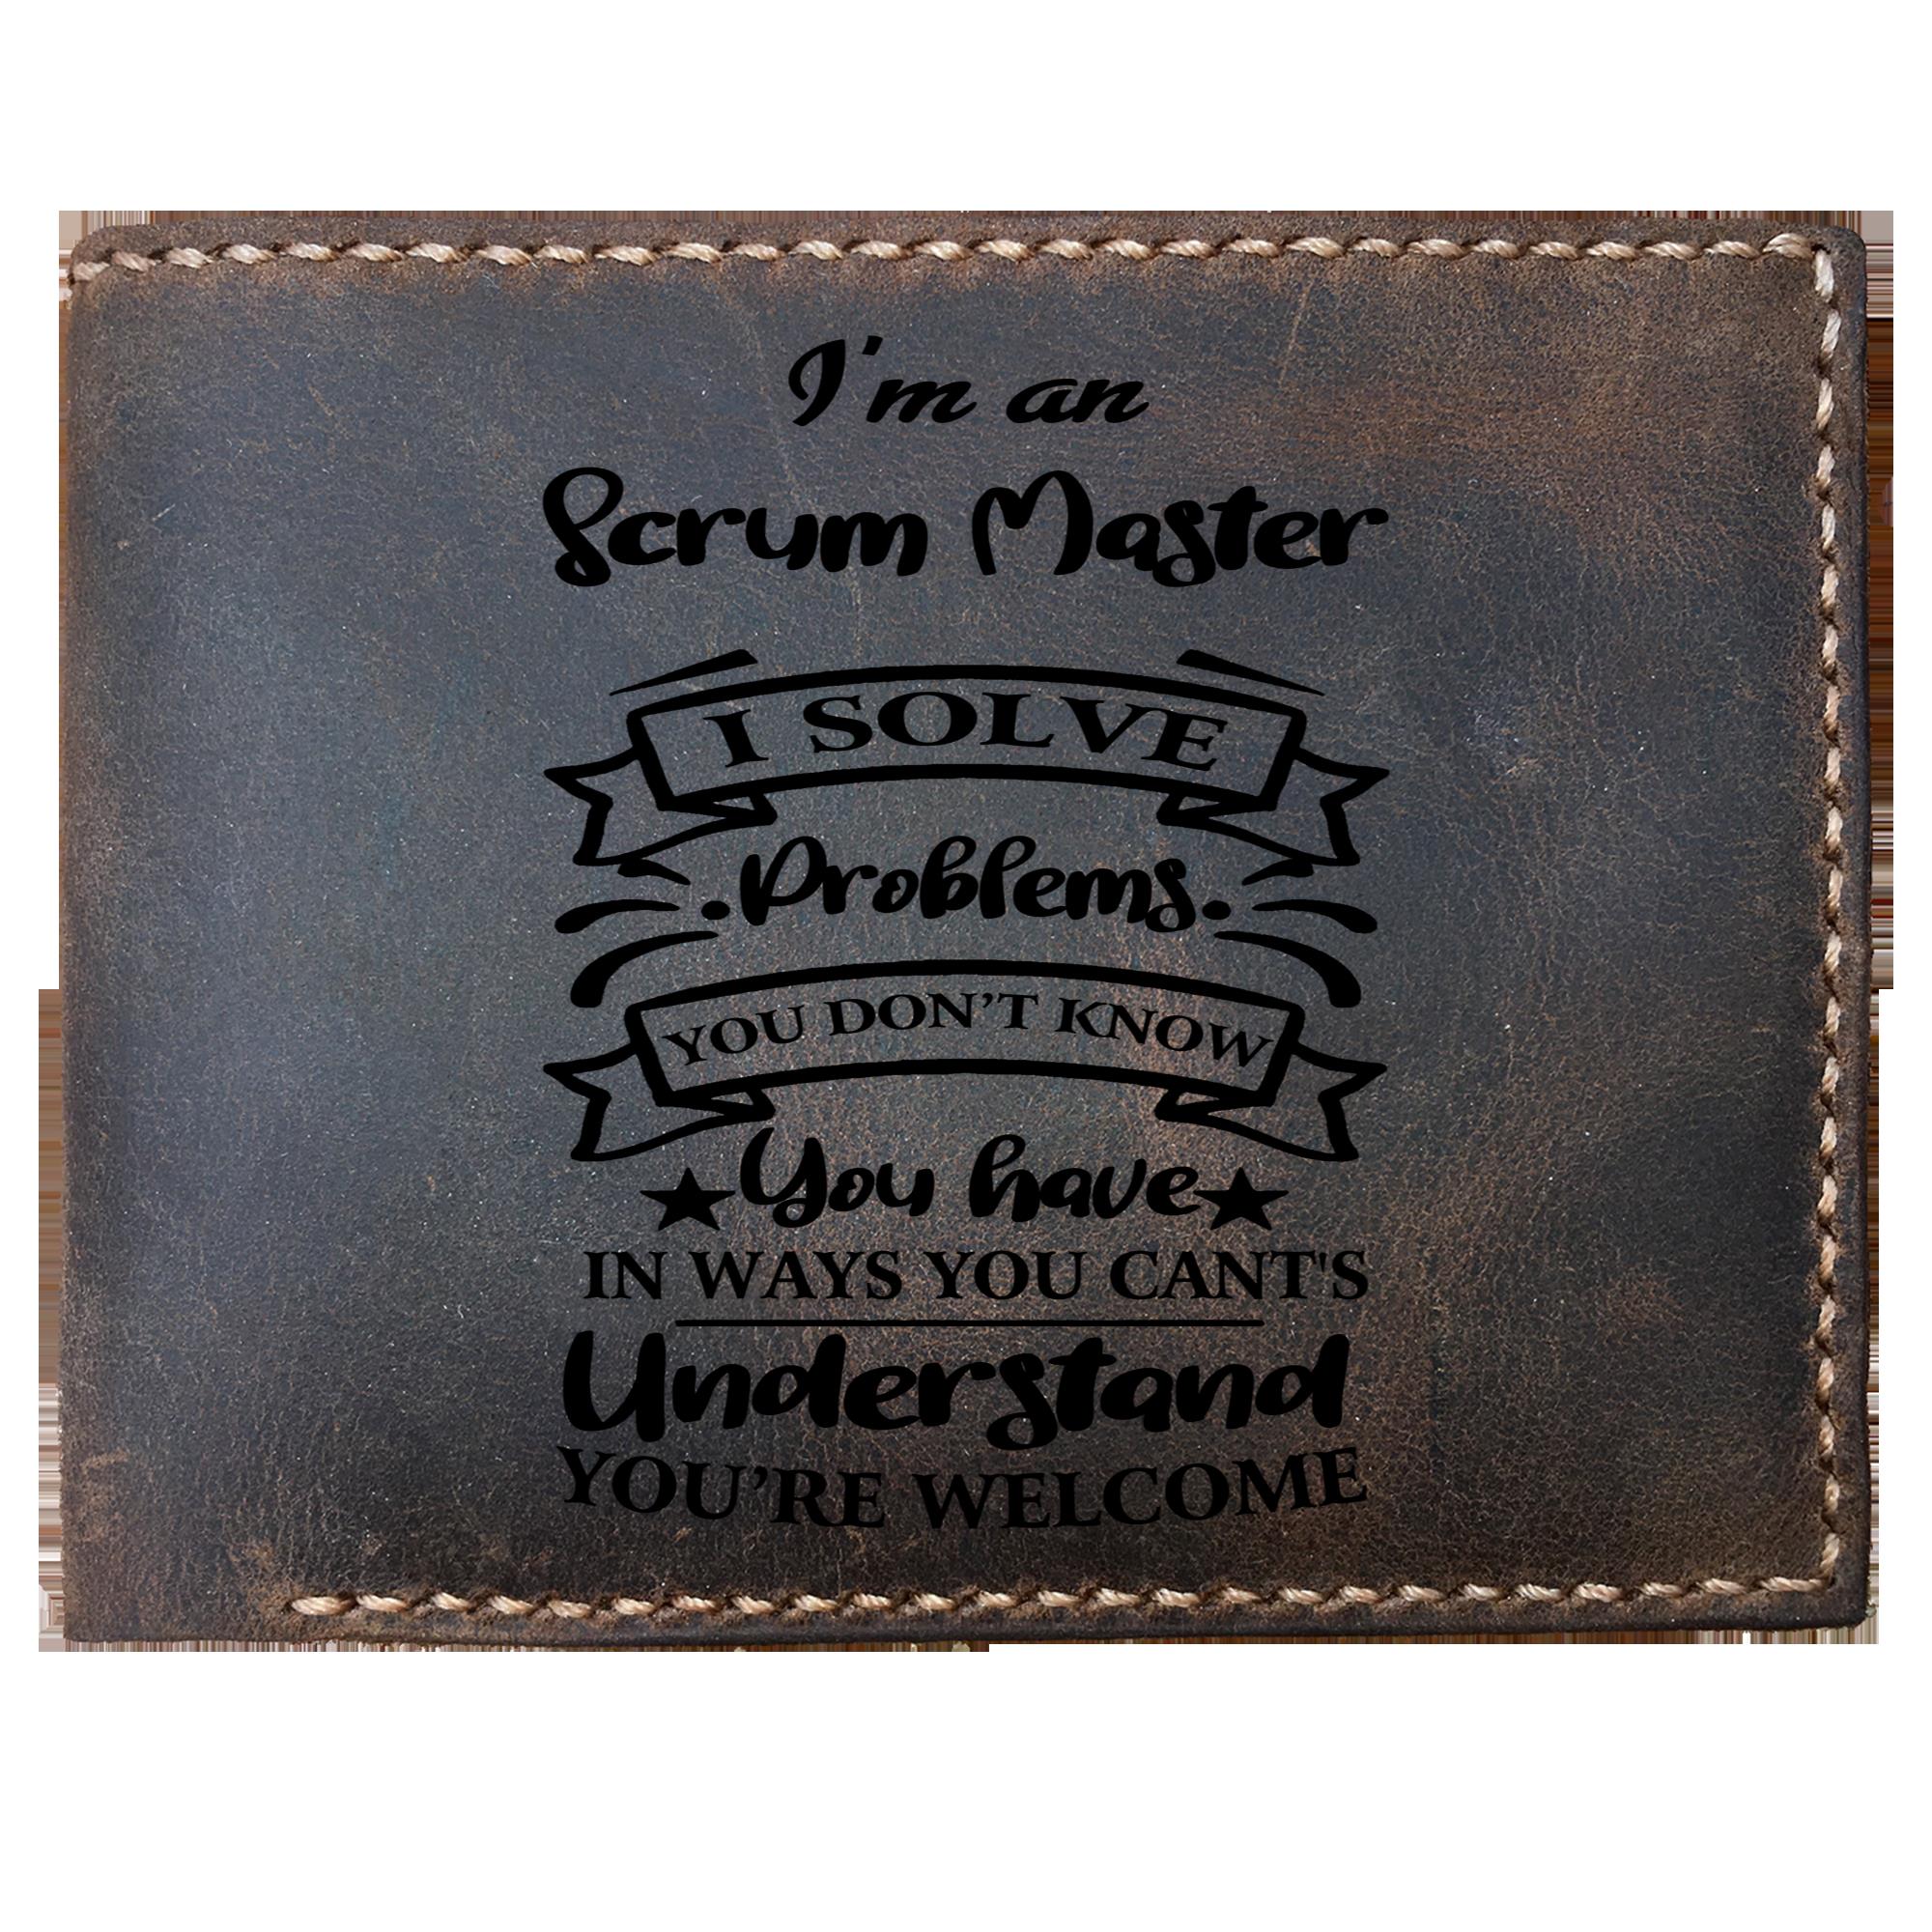 Skitongifts Funny Custom Laser Engraved Bifold Leather Wallet For Men, I'm an Scrum Master Solve Problems, Father's Day Gifts